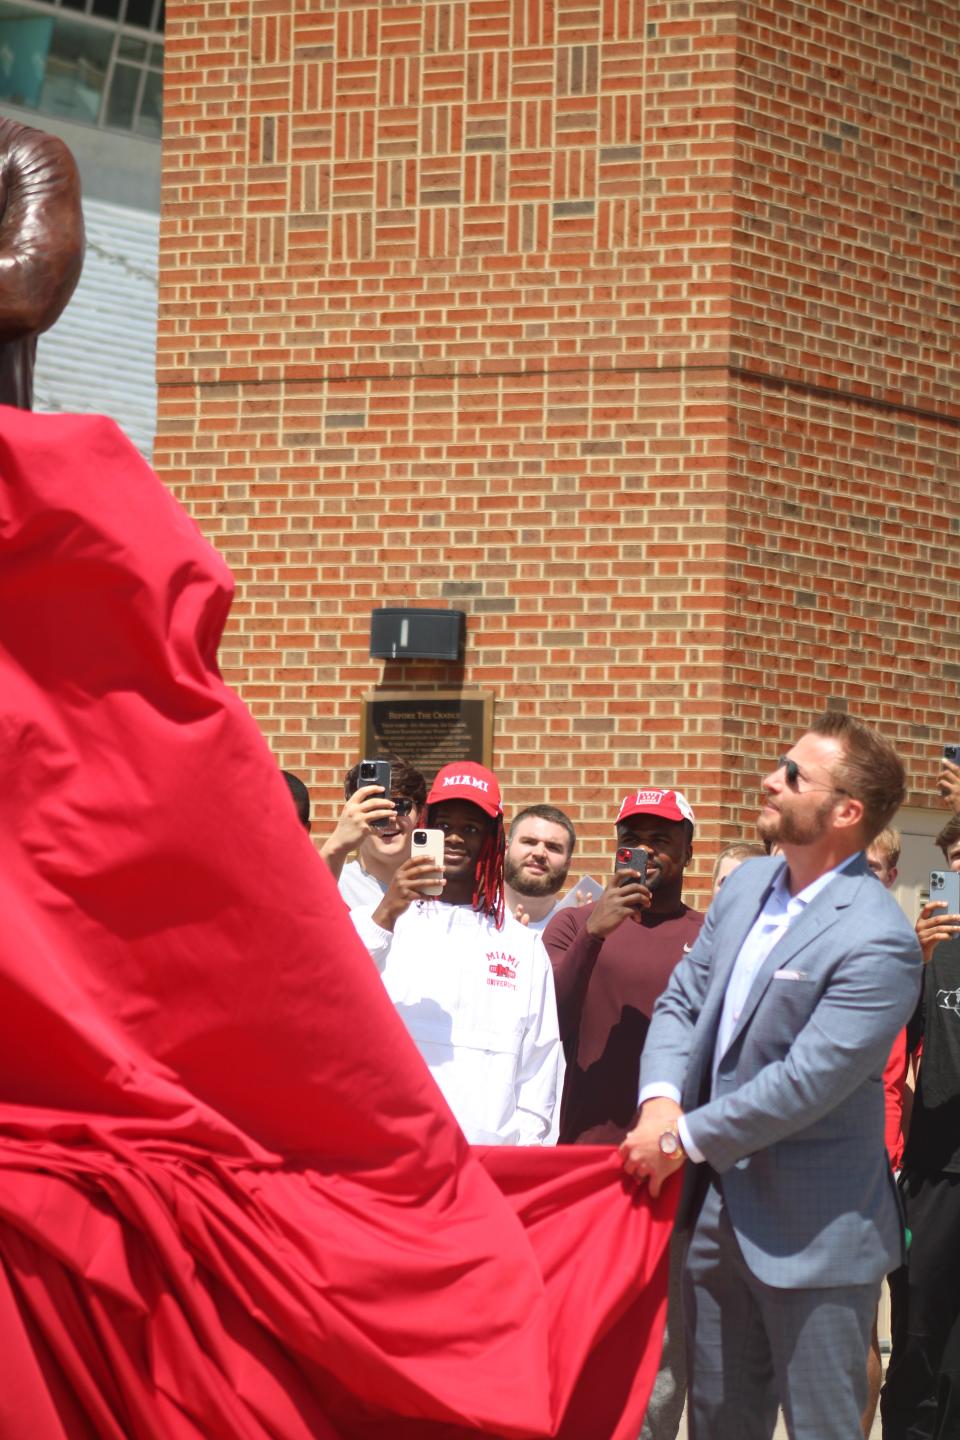 Sean McVay pulls off the tarp to unveil his statue. Los Angeles Rams head football coach Sean McVay became the 10th coach to have a statue in Miami University's prestigious Cradle of Coaches Plaza May 6, 2023. McVay was a former player at Miami and has been coaching in the NFL since 2009.  He became the youngest head coach in NFL history to win a Super Bowl (36) when the Rams beat the Bengals in 2022.